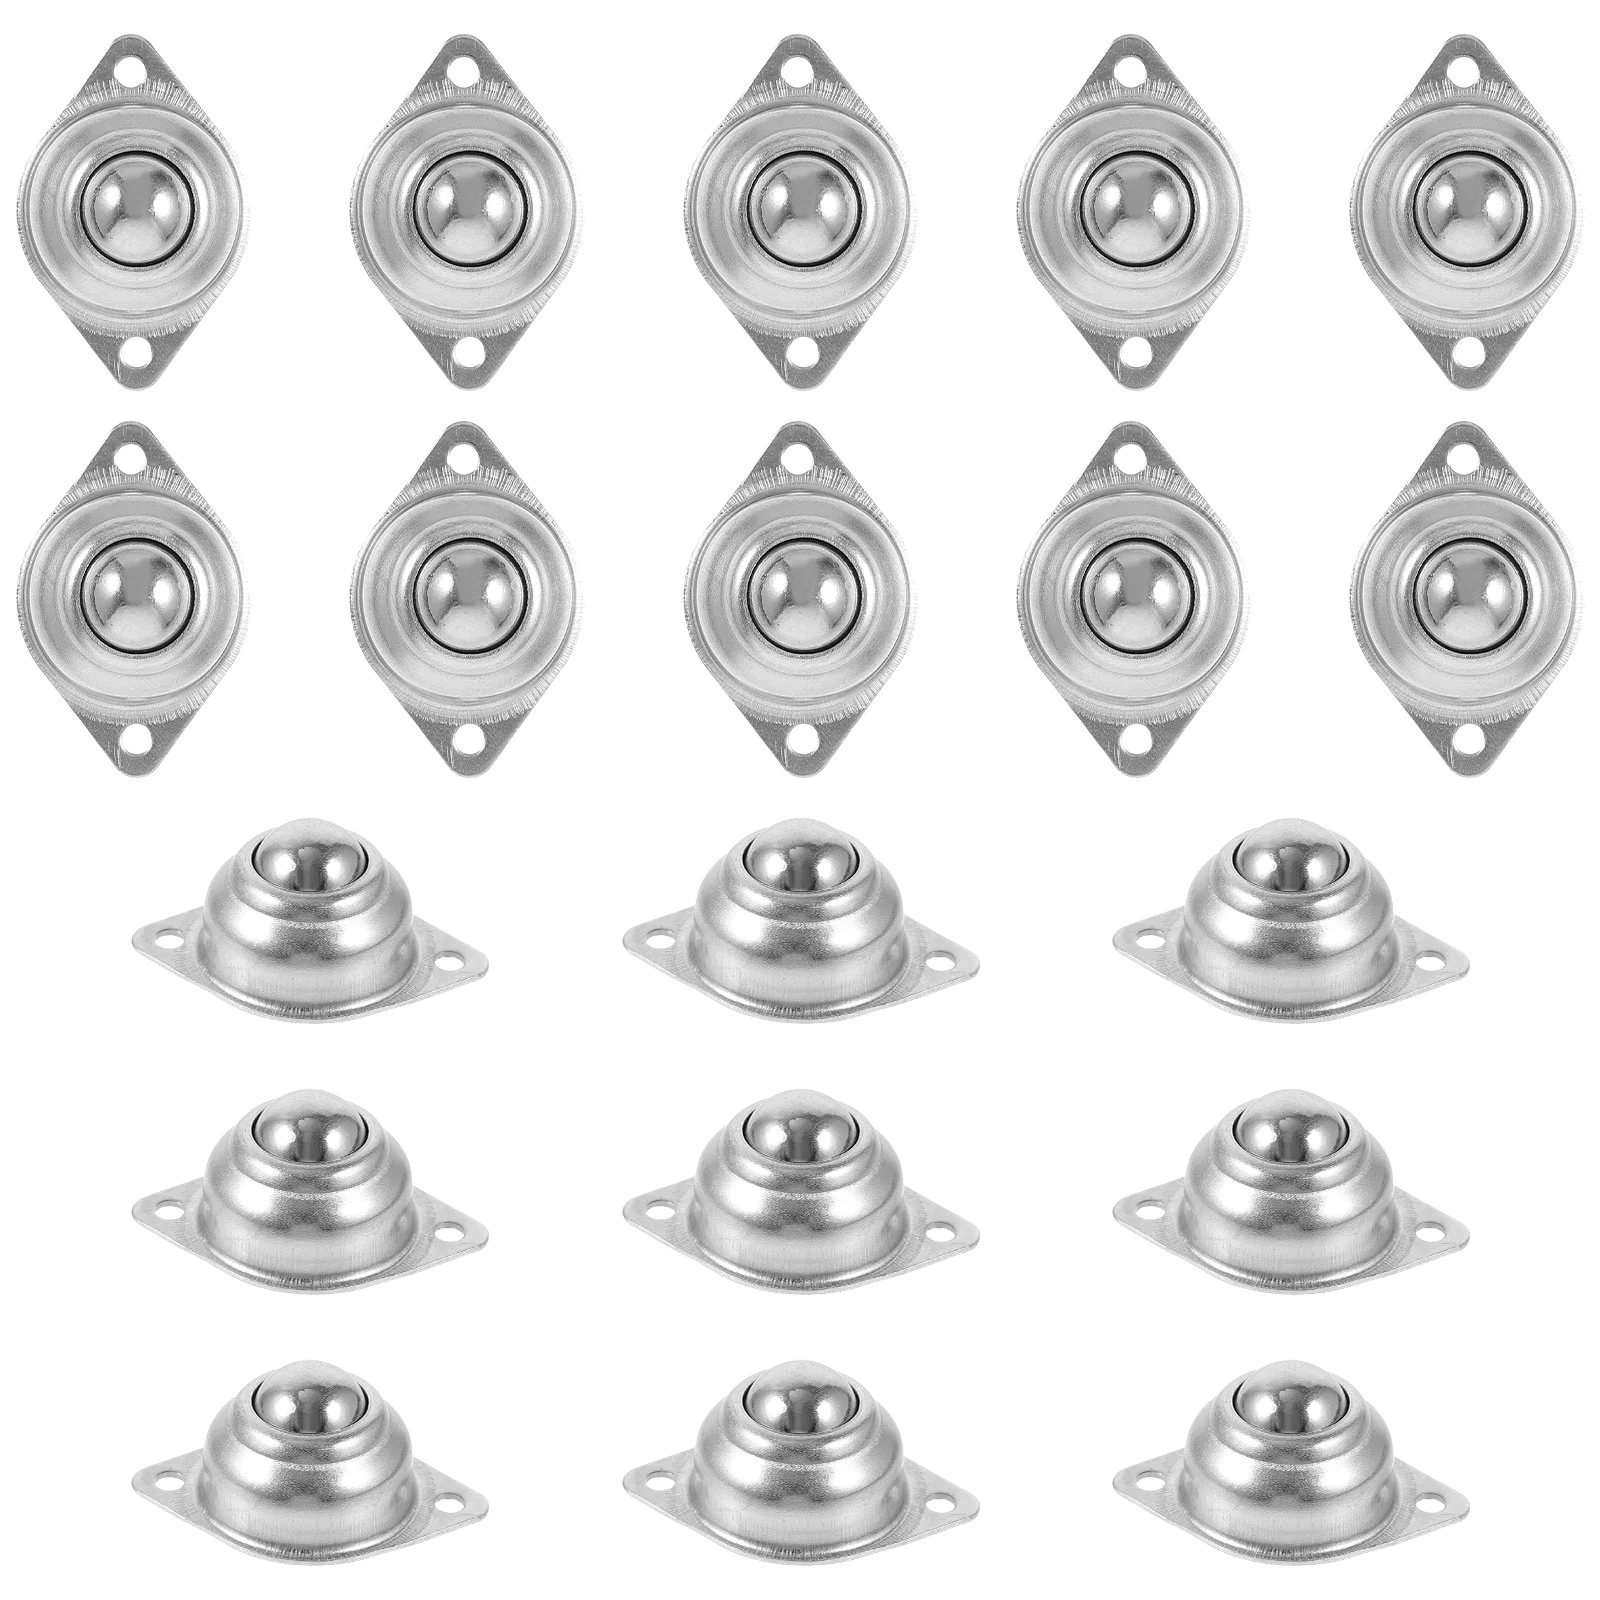 

20 Pcs Universal Ball Mini Wheels Transfer Units Round Roller Bearing Steel Rotation Casters Baby